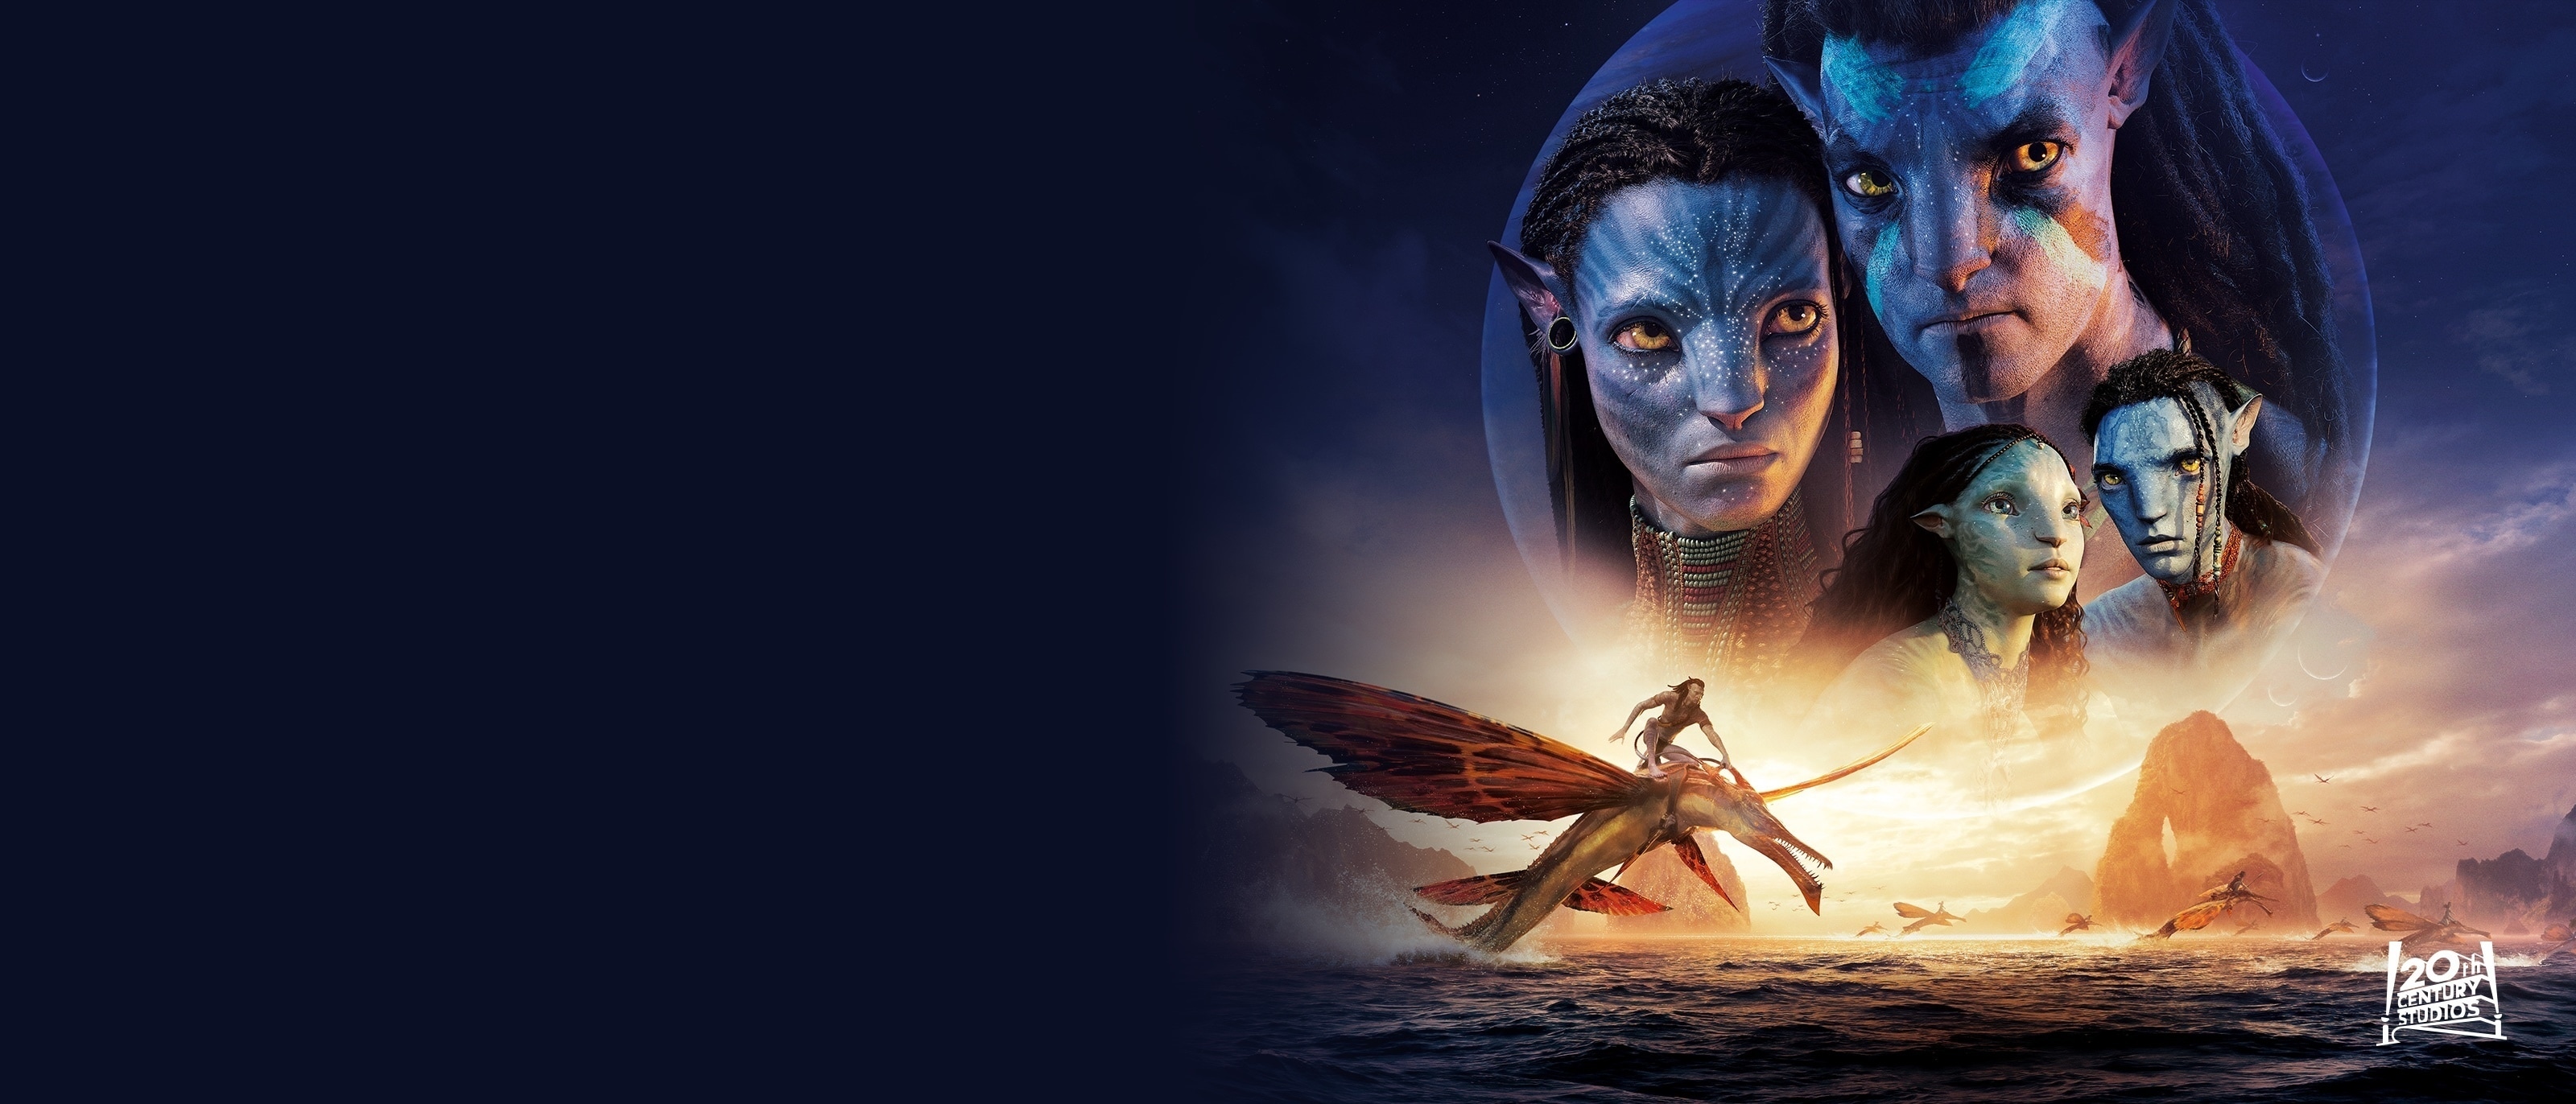 Find out more about Avatar: The Way of Water